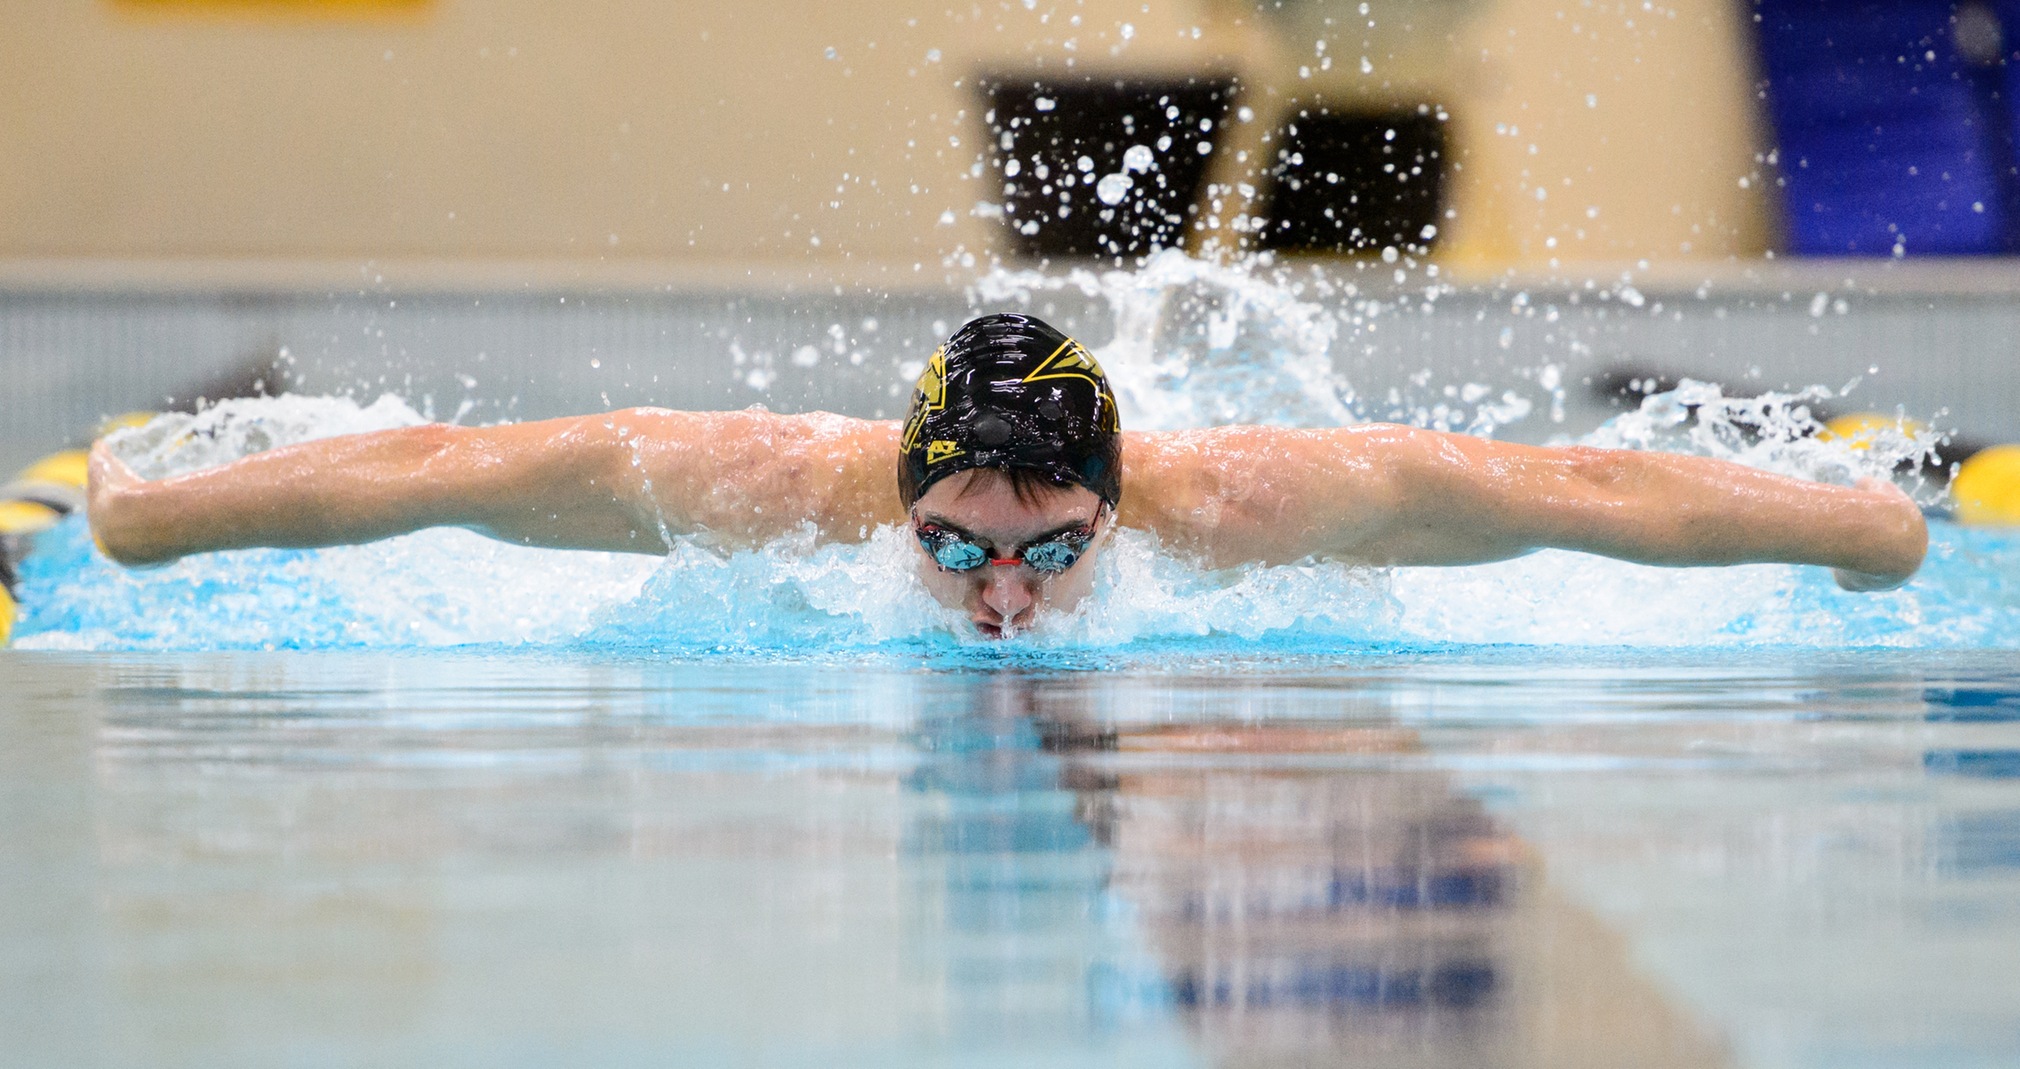 Josiah Vandenberg placed 14th in the 400-yard individual medley and 19th in the 200-yard butterfly.